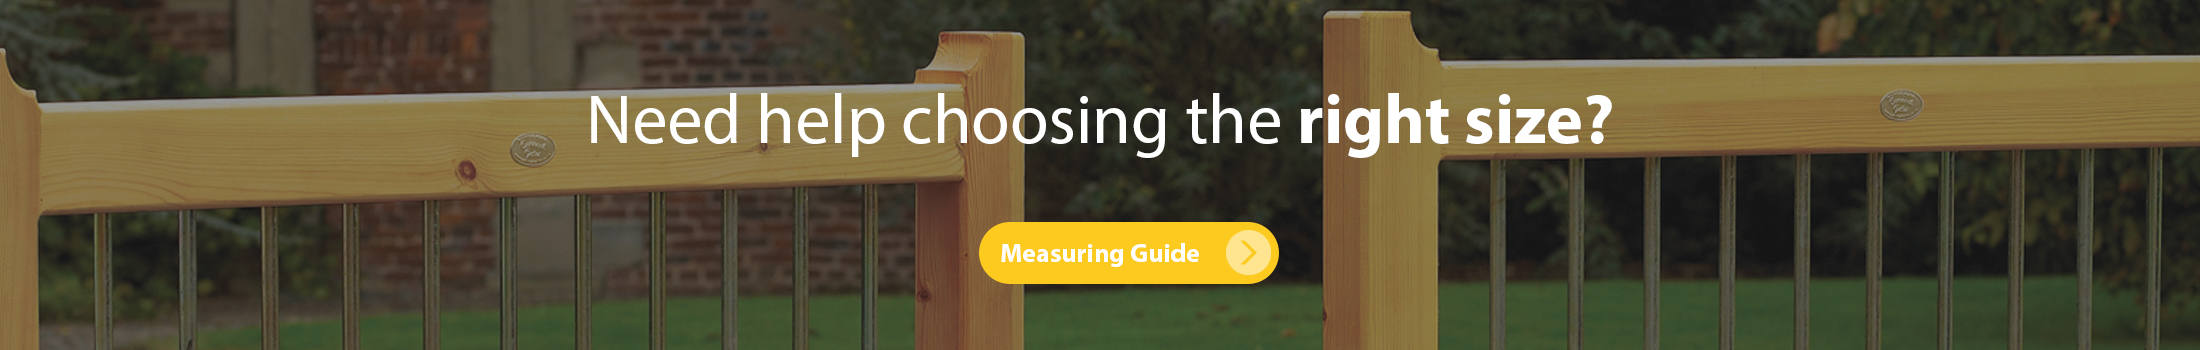 Click here to view the measuring guide